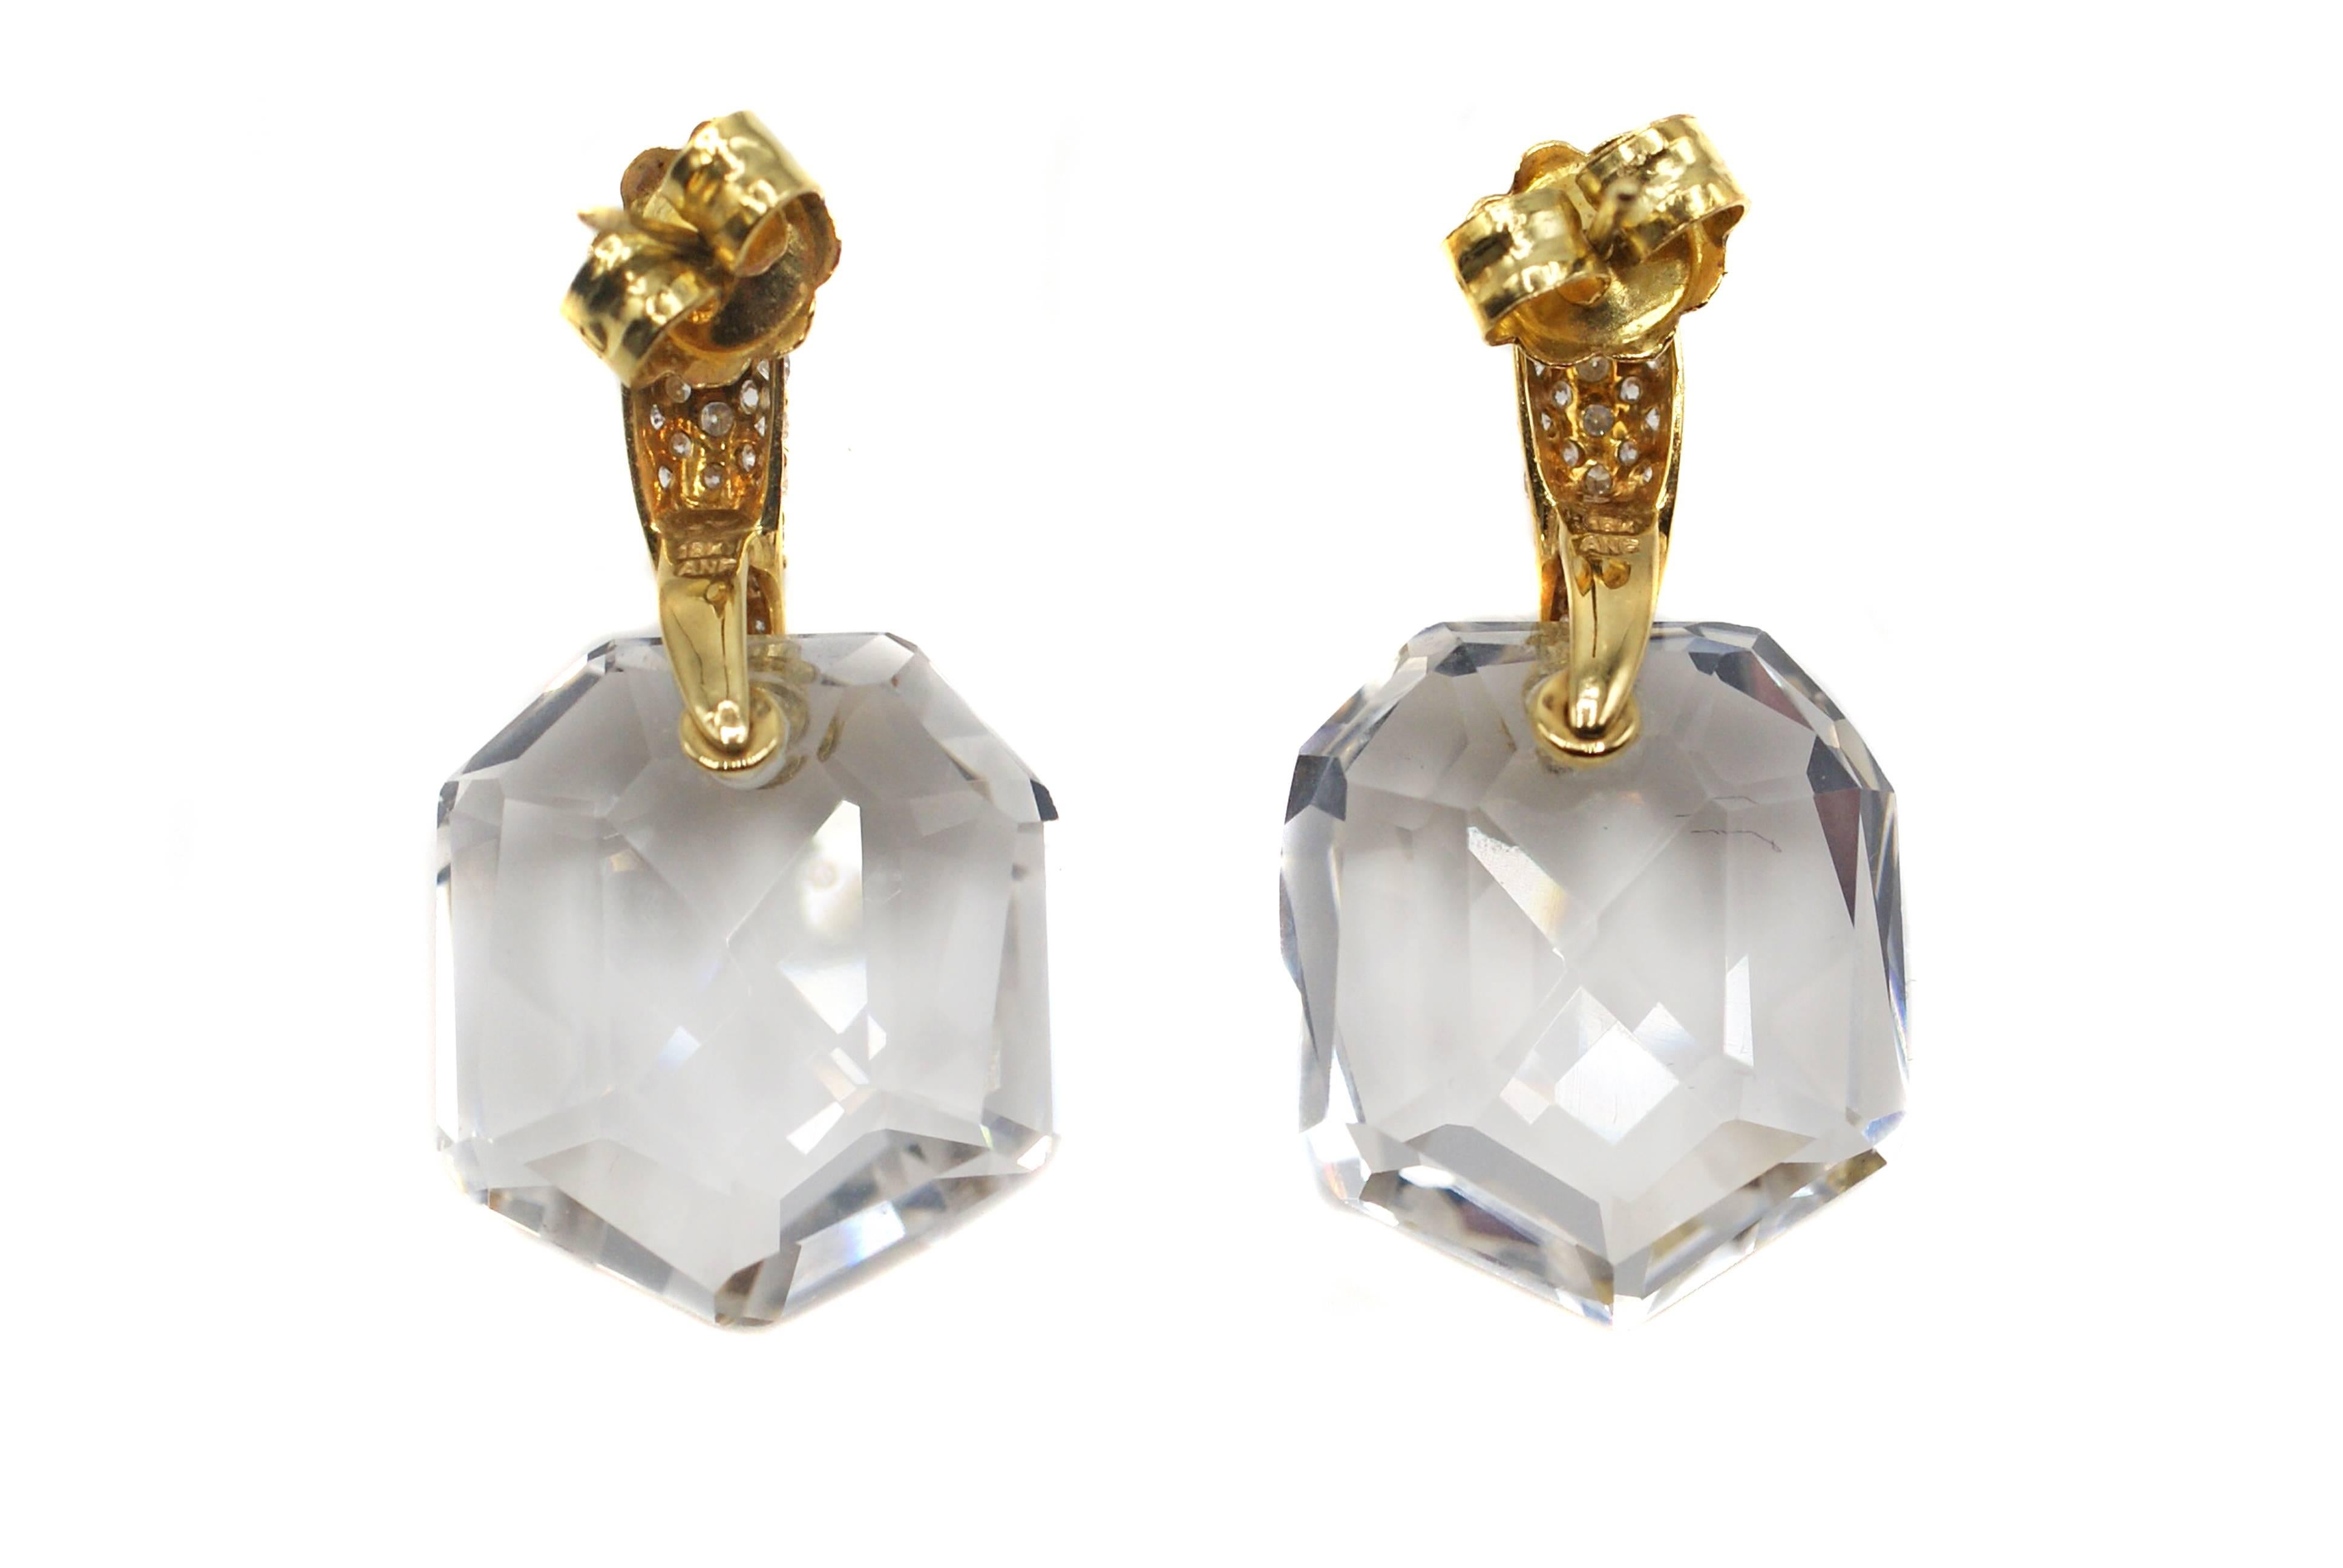 These chic and elegant earrings have been masterfully designed and hand-crafted out of 18 karat yellow gold. The tops have been pave set with bright white and sparkling round brilliant cut diamonds. Extending from these are 2 clear Rock Crystals